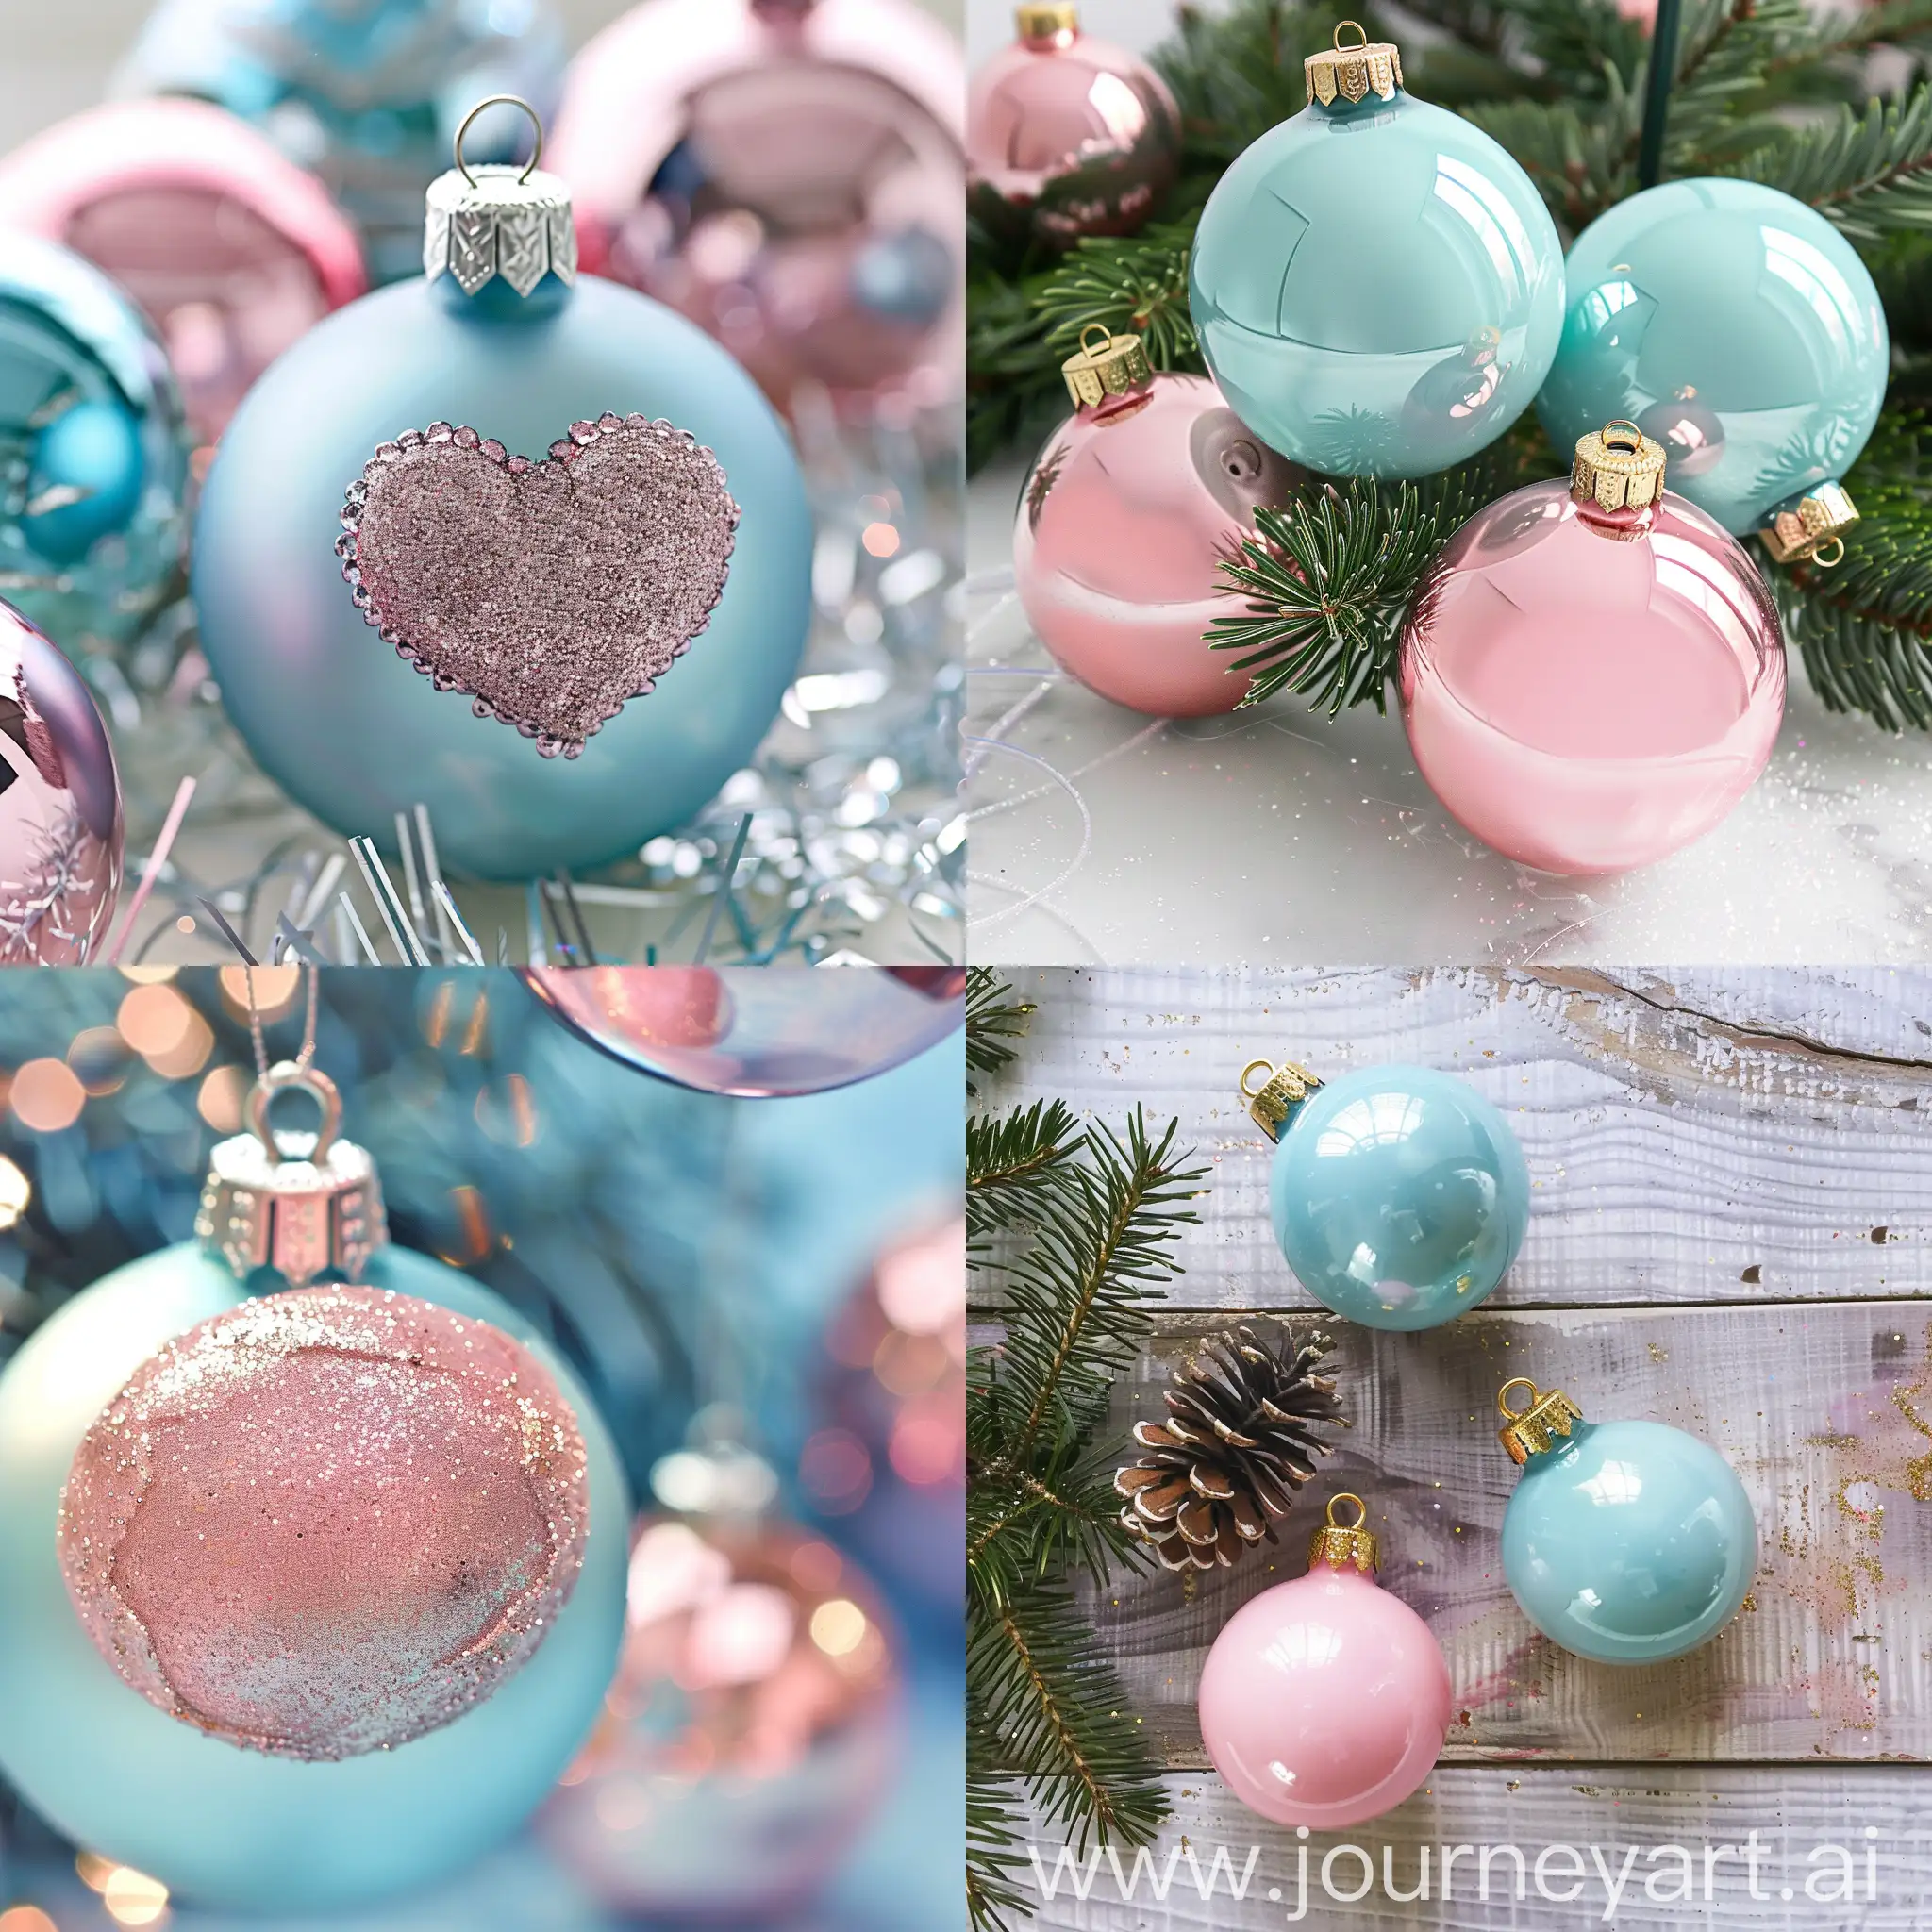 Festive-Christmas-Decorations-in-Tiffany-Blue-and-Pink